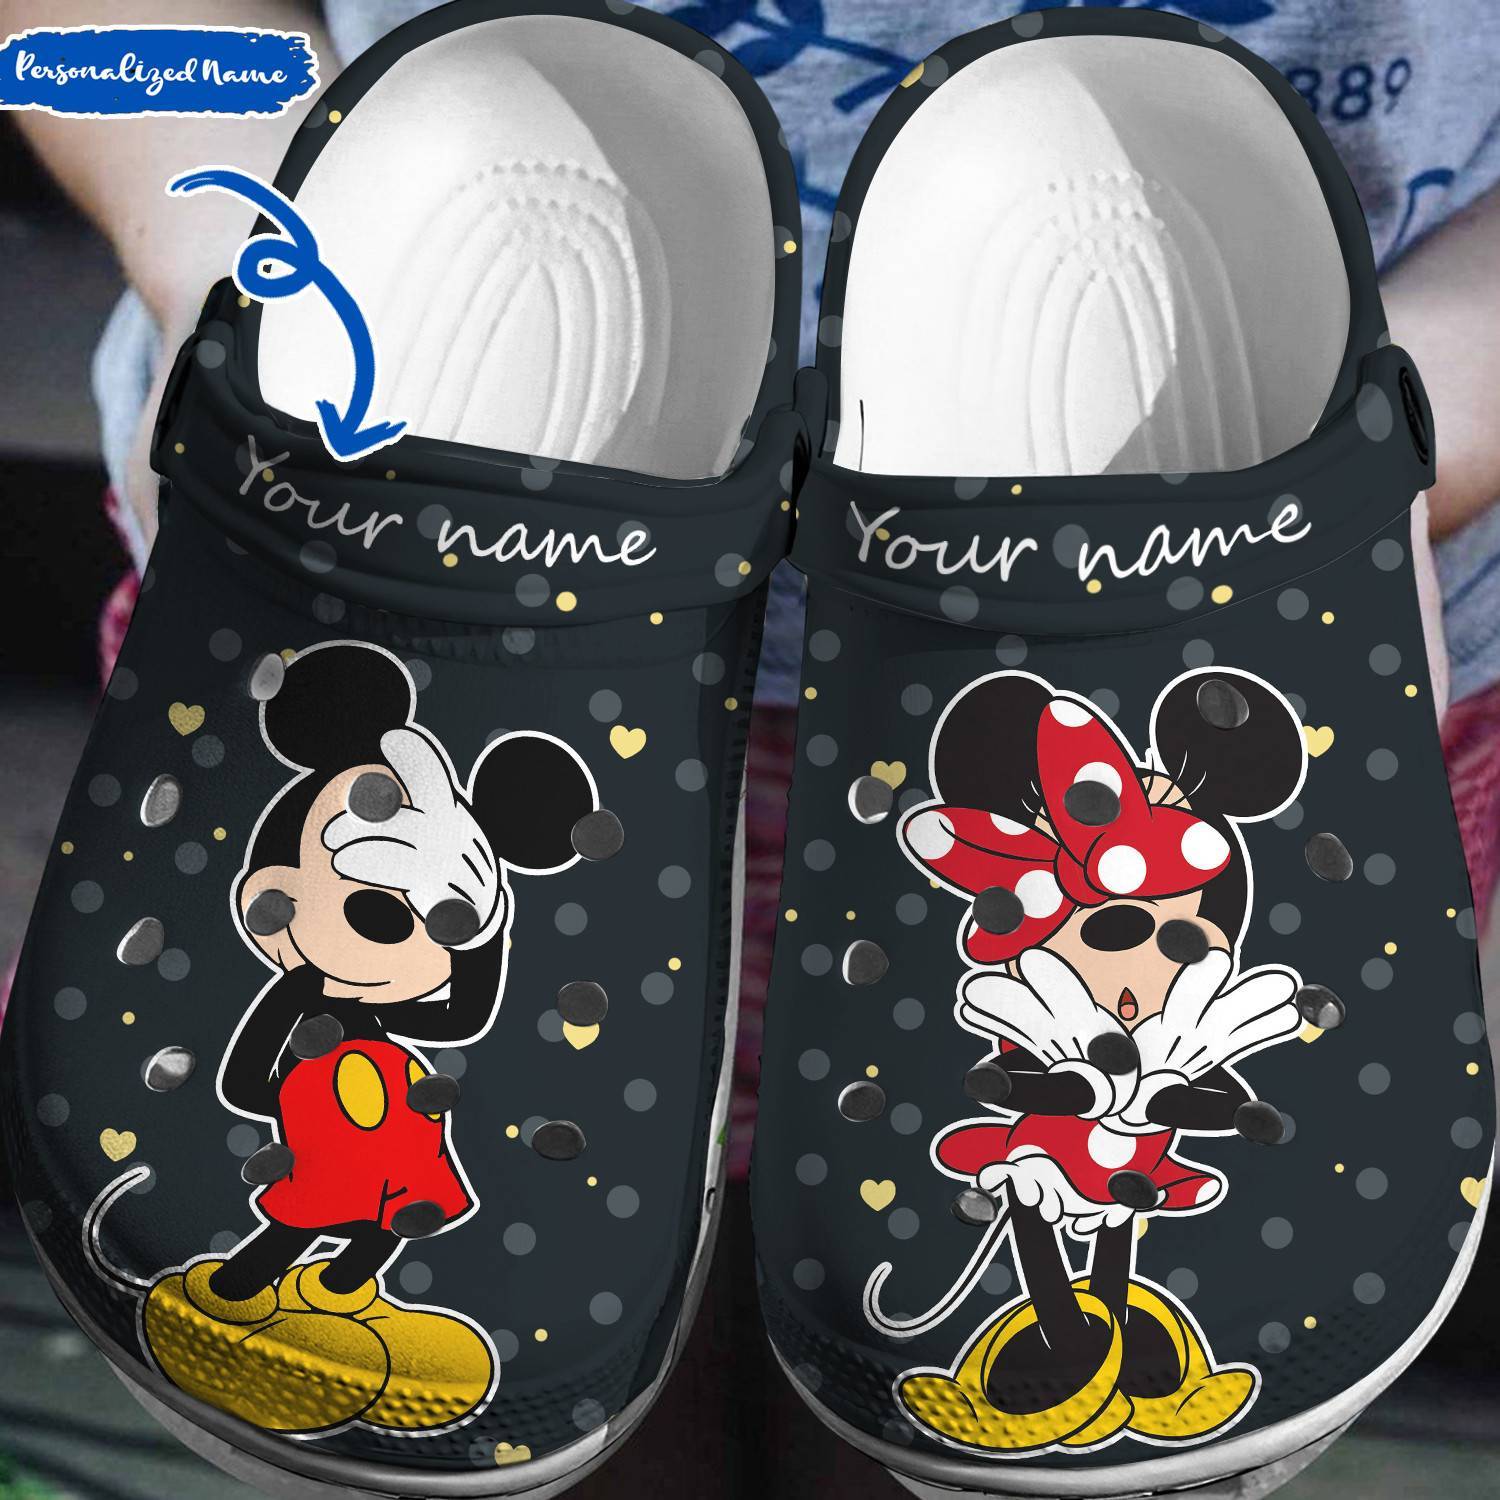 Create Your Disney Look: Personalized Mickey Minnie Crocs 3D Clog Shoes